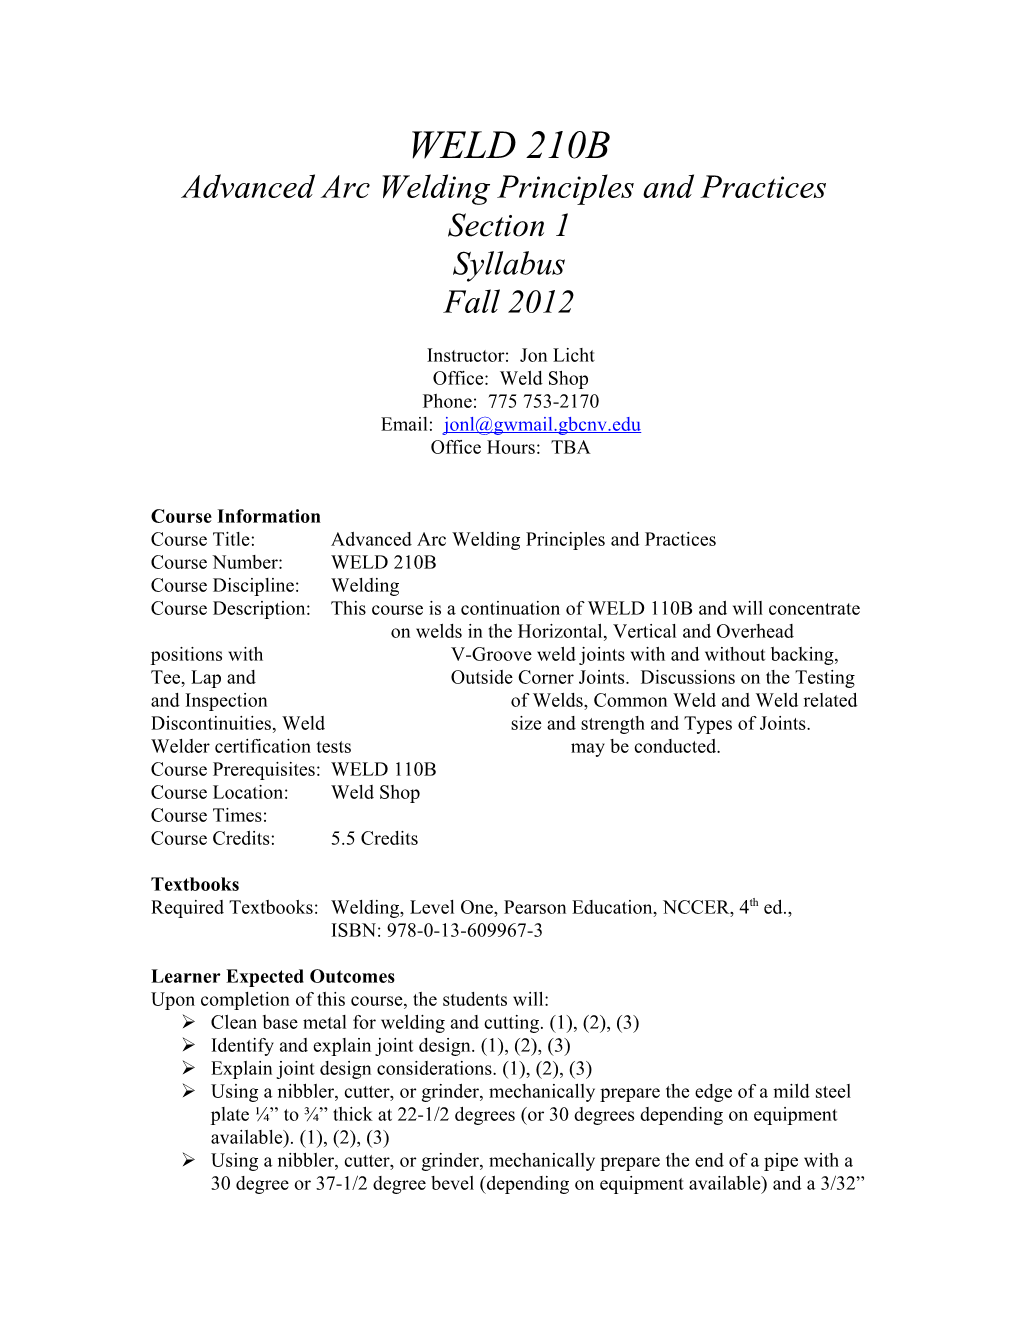 Advanced Arc Welding Principles and Practices